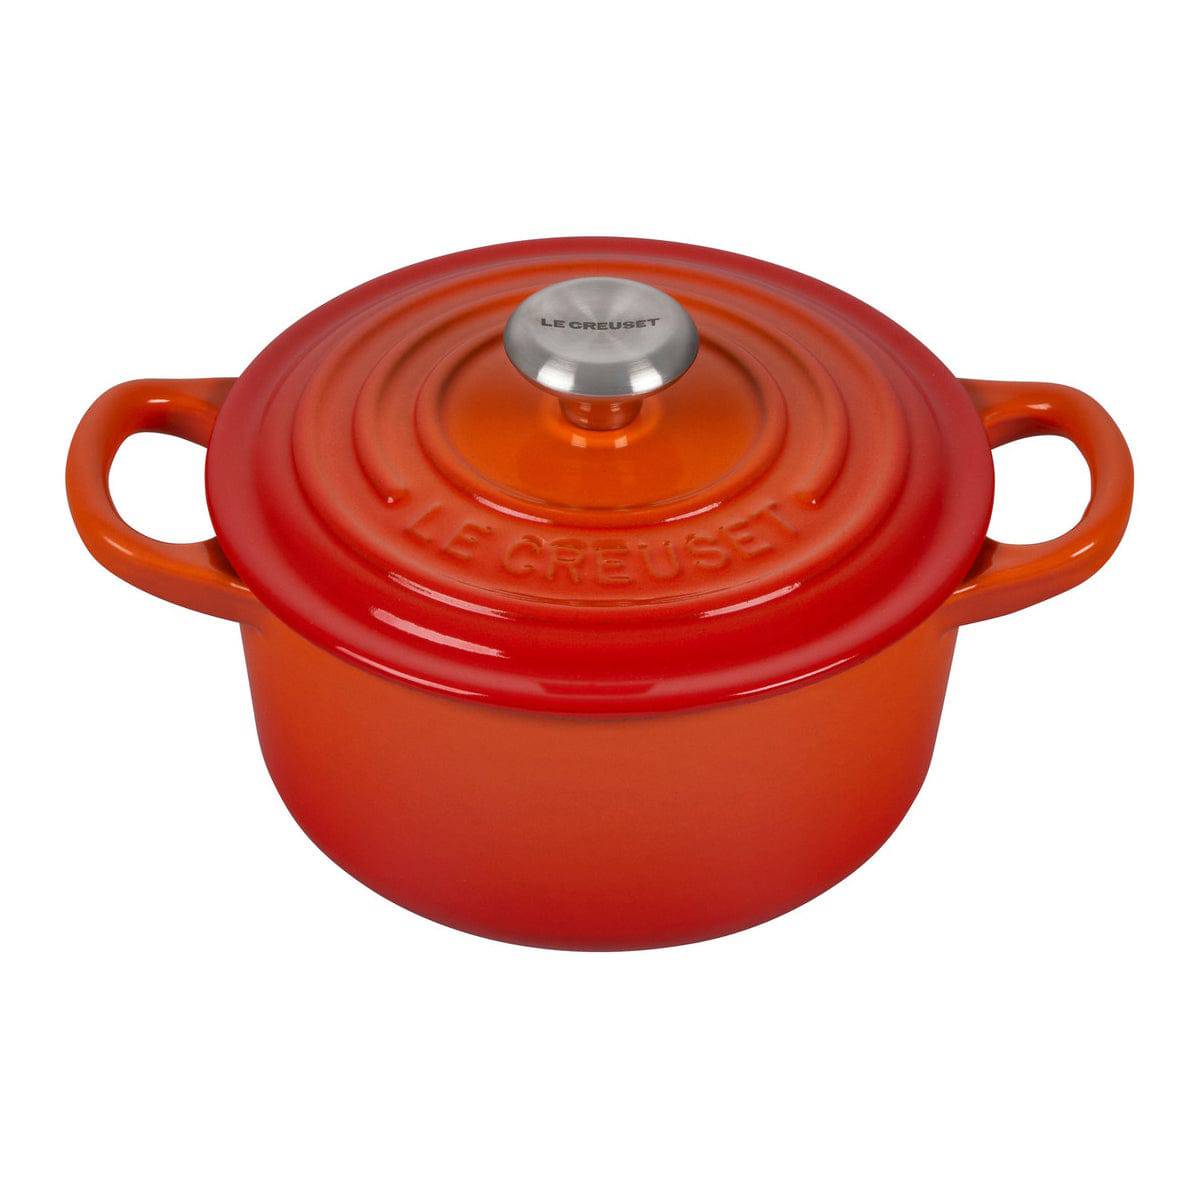 Le Creuset Signature Enameled Cast Iron Round French / Dutch Oven With Lid, 4.5-Quart, Flame - Kitchen Universe